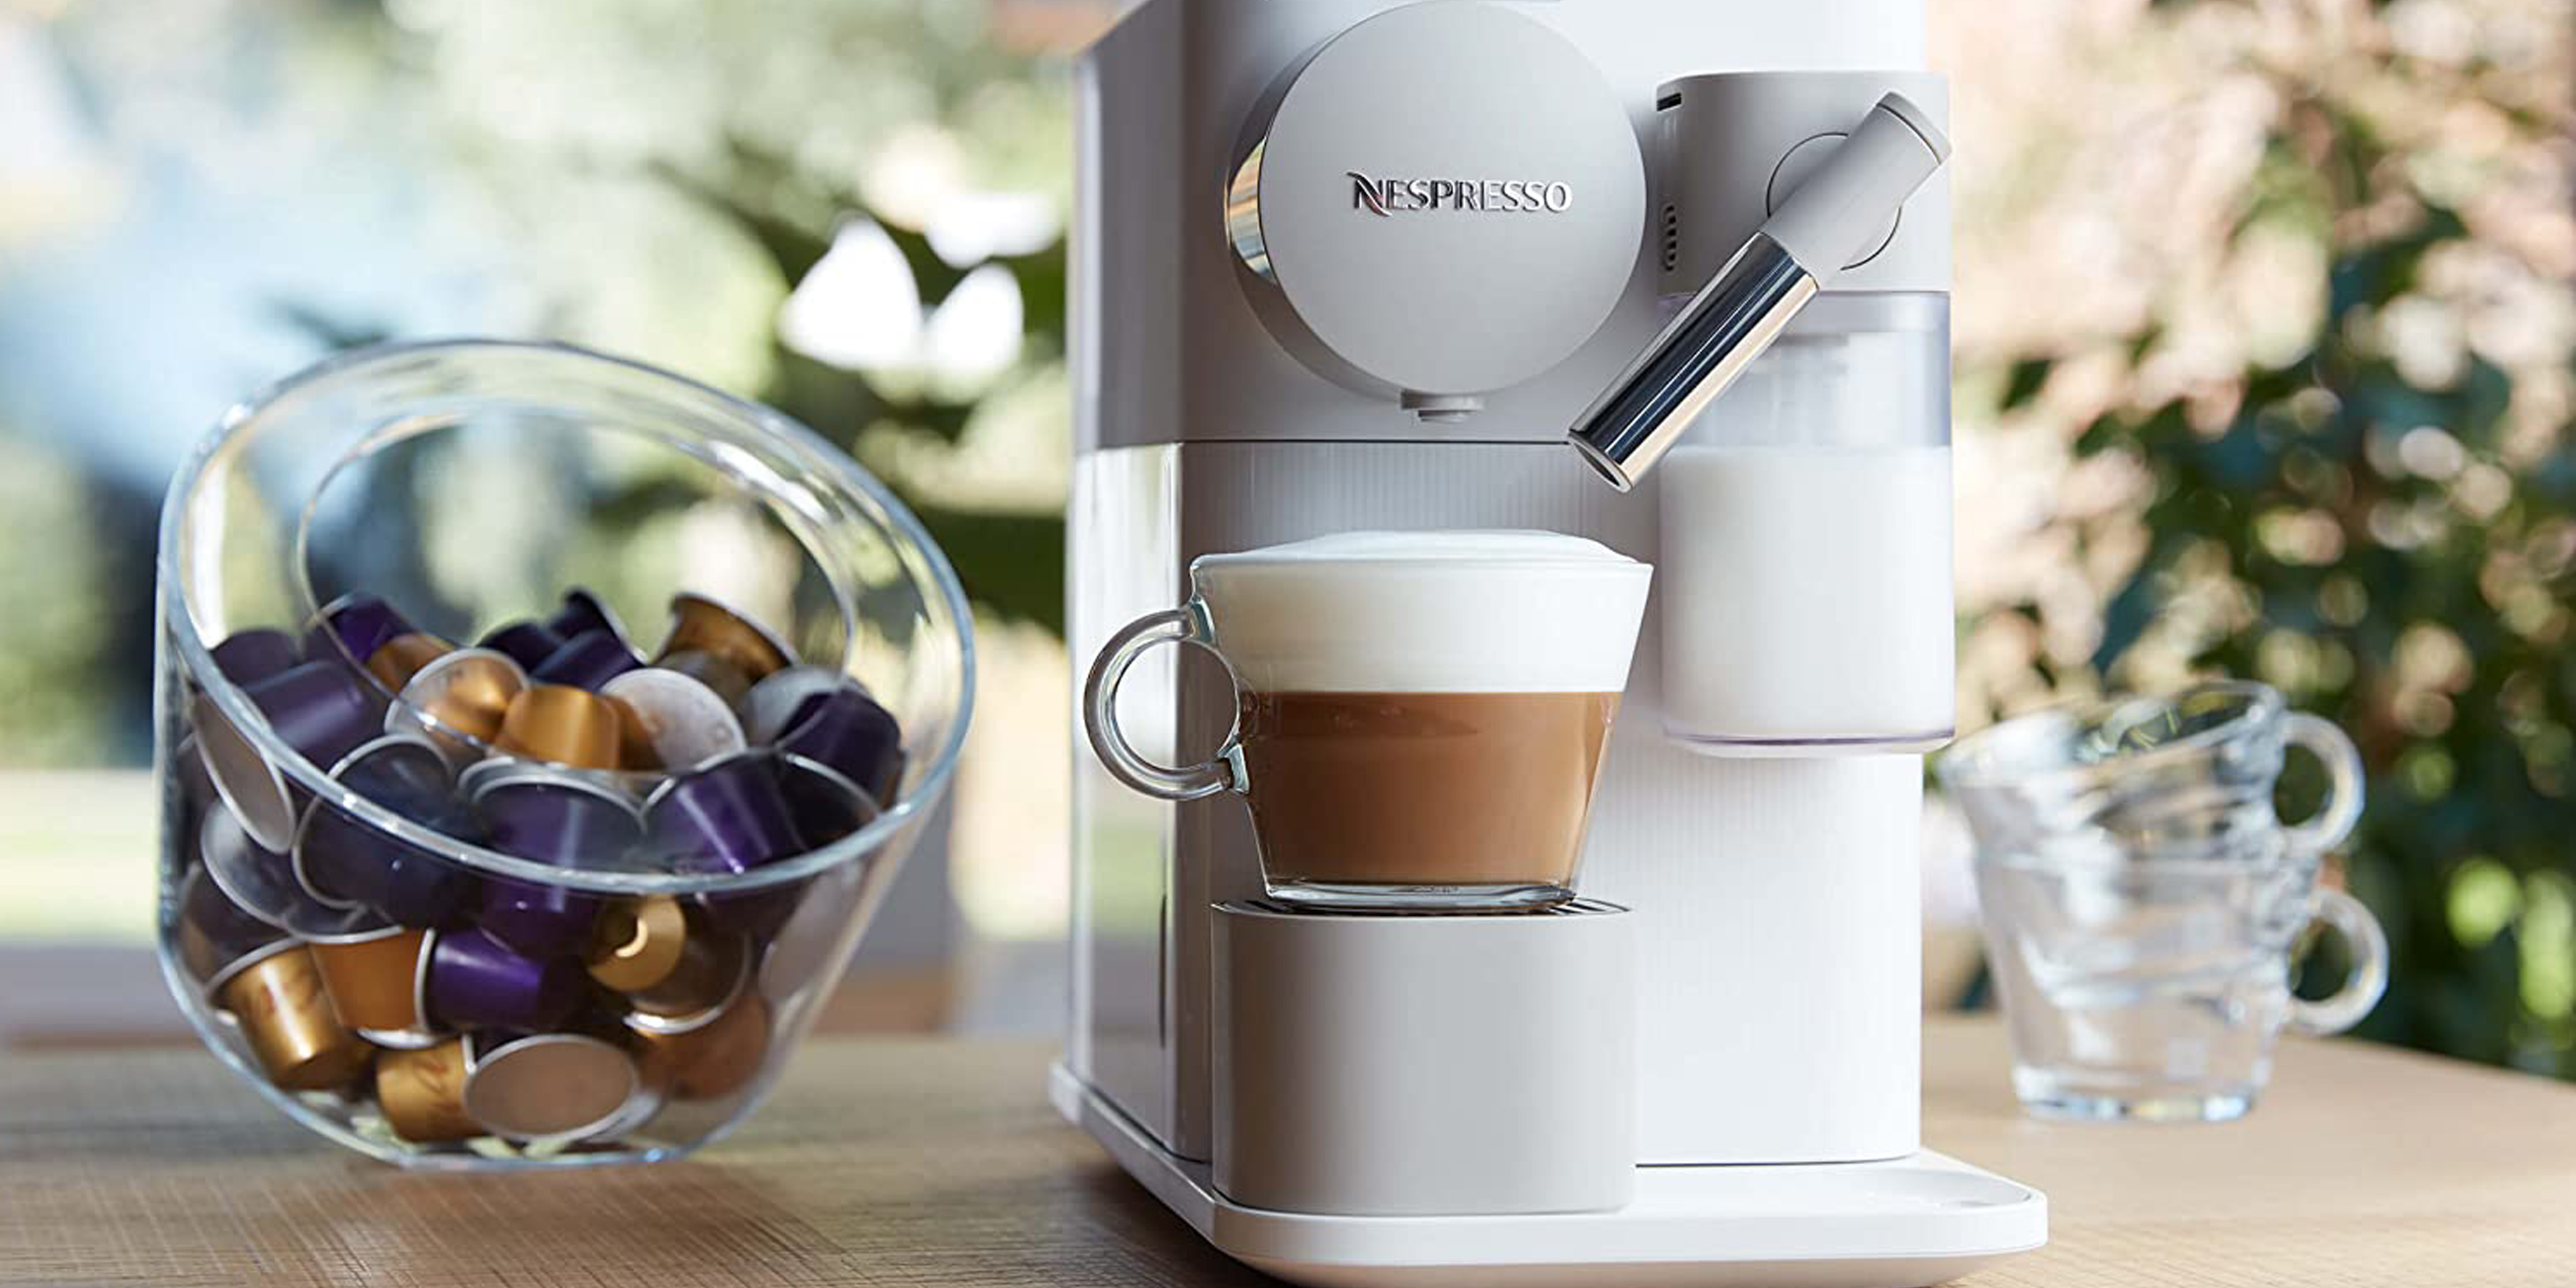 Seem inadvertently Implement Want a way to make lattes at home? We tried the Nespresso Lattissima to see  if it's up to the job | Ideal Home